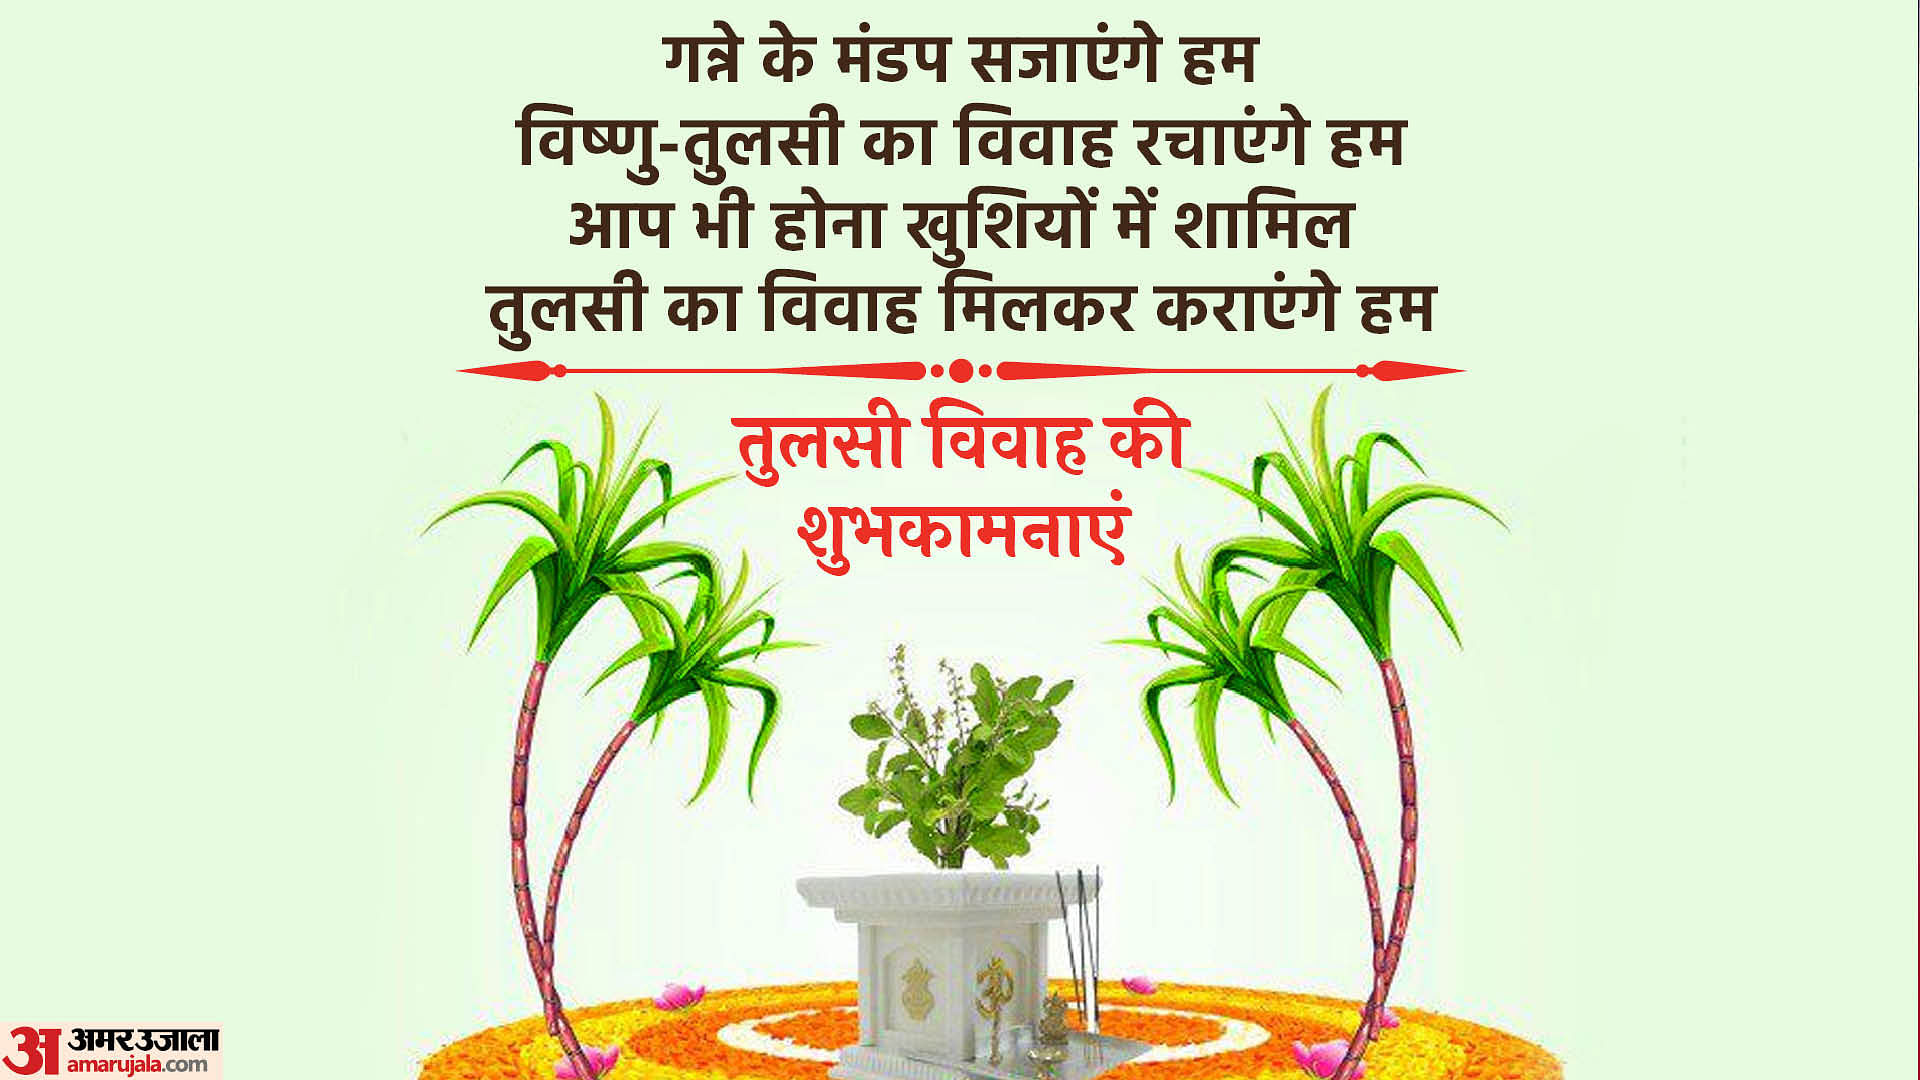 Happy Ekadashi 2019: Wishes, Messages, Quotes, Images, Aarti, Prayers,  Facebook & Whatsapp status - Times of India